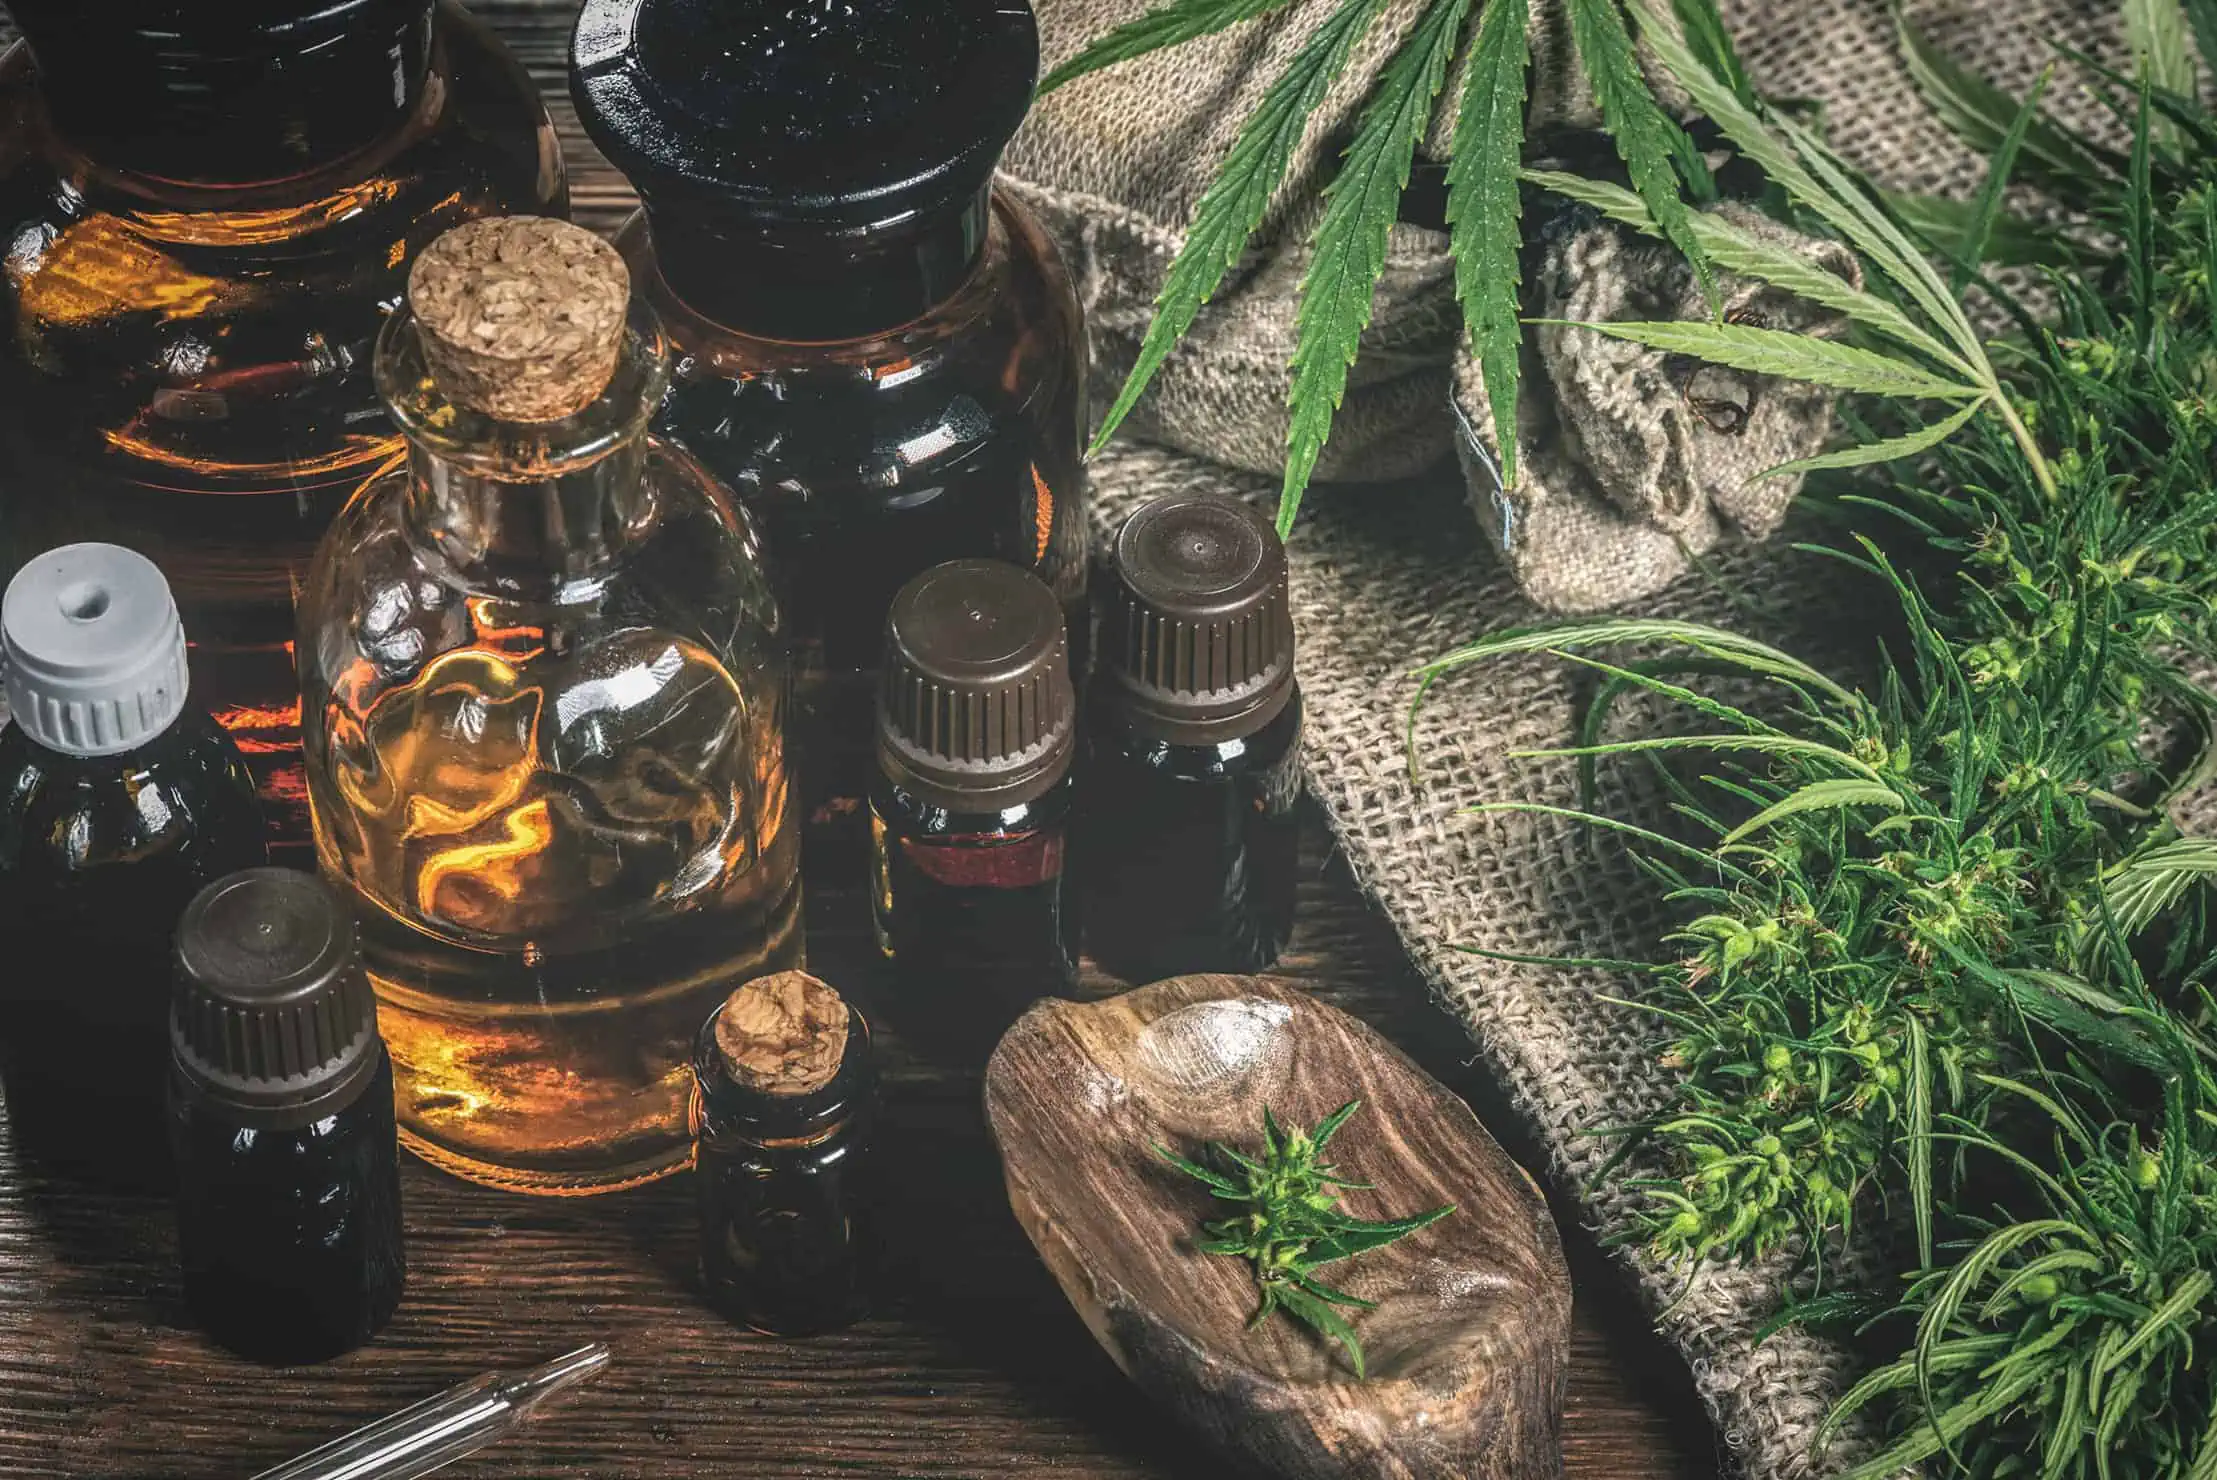 Want to Become a Cannabis Sommelier?